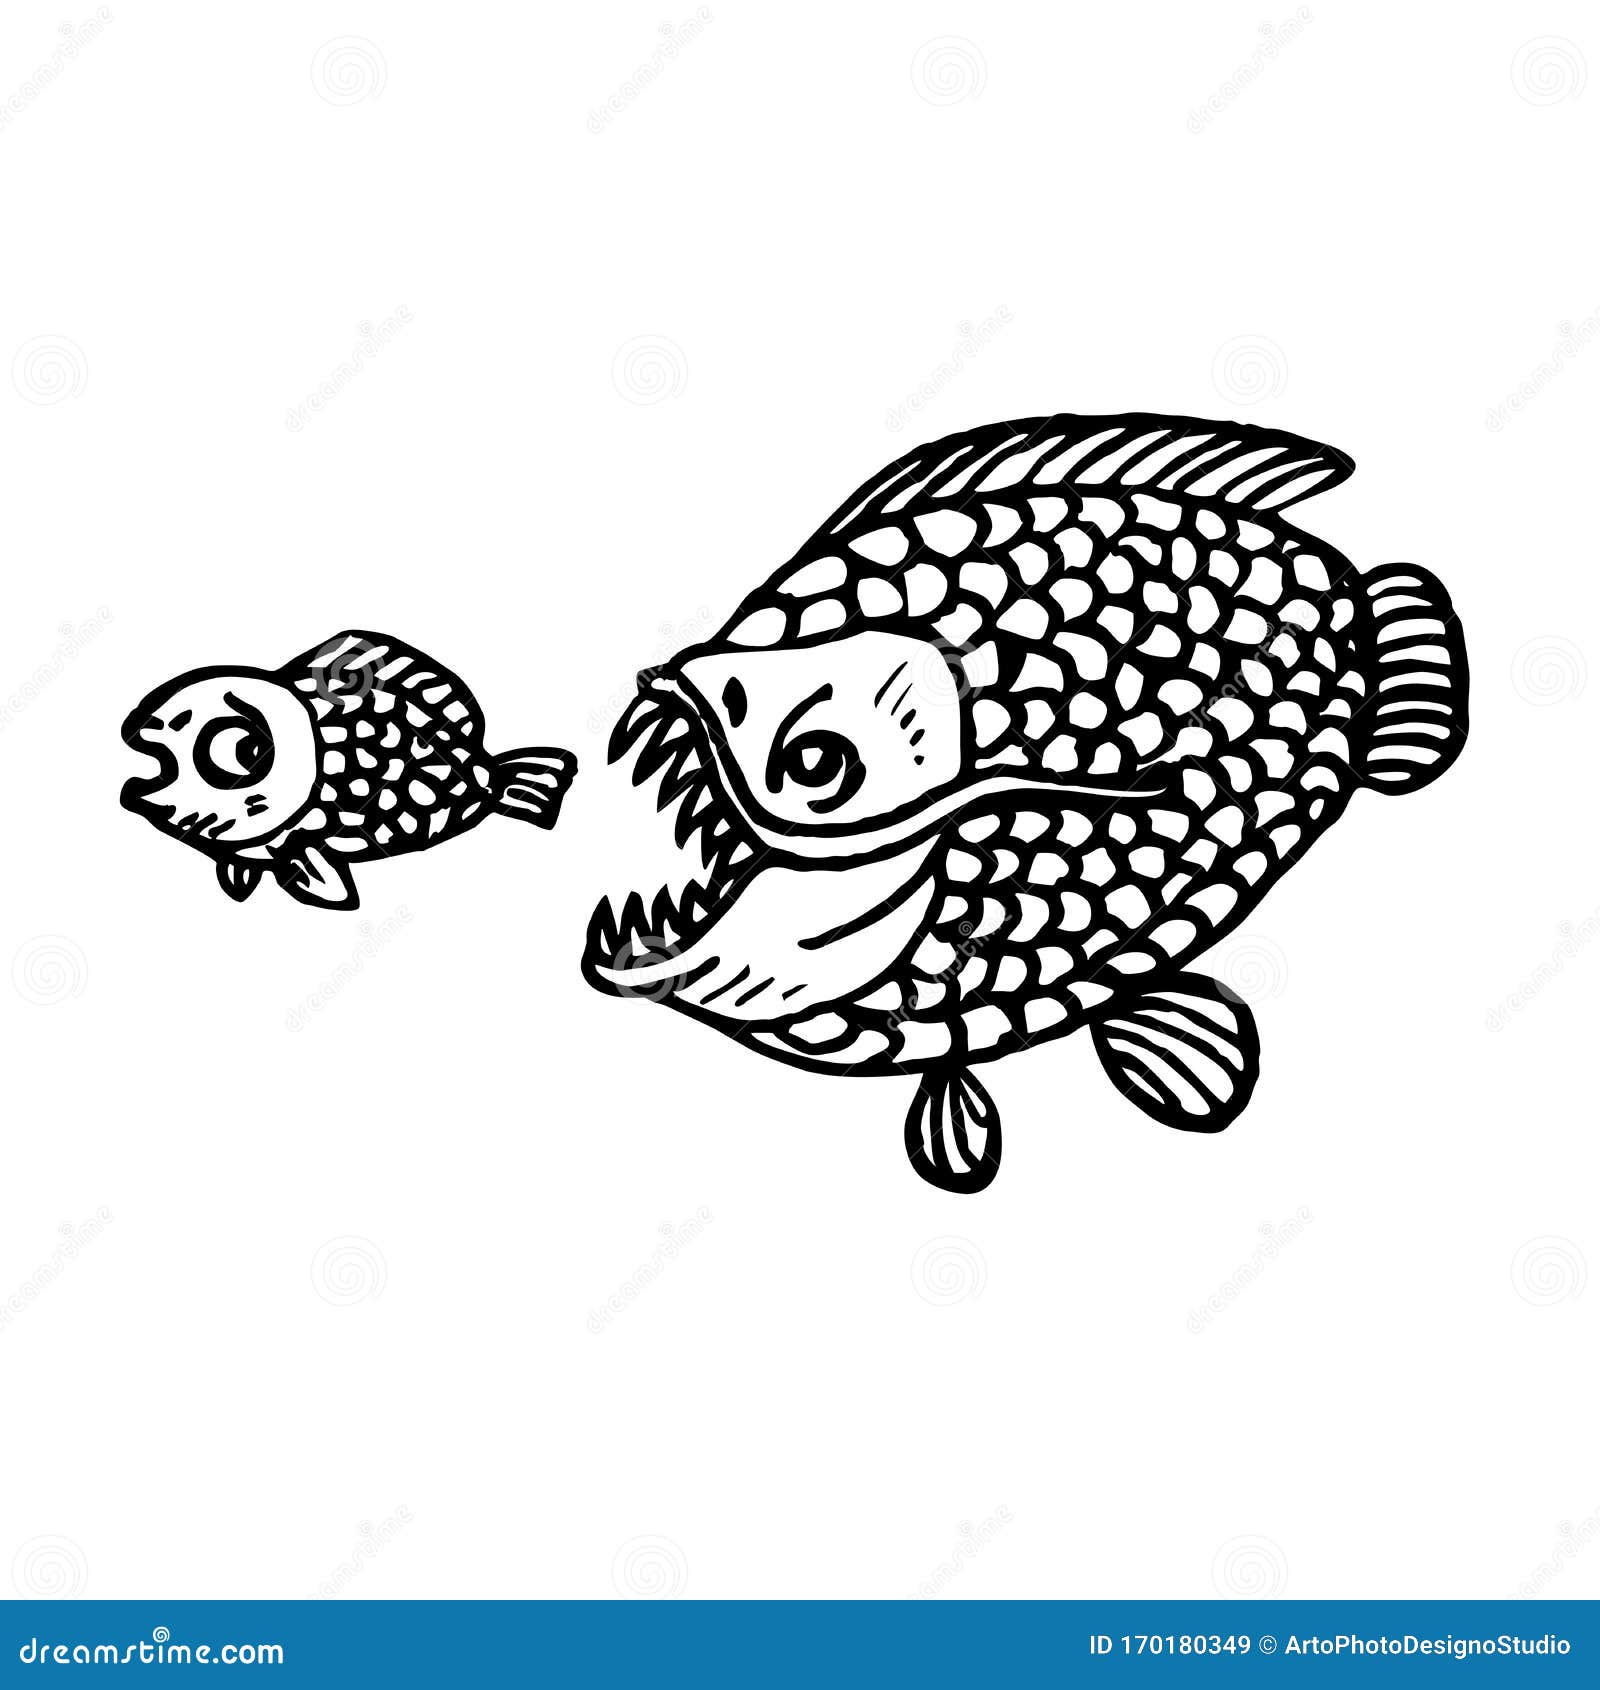 TOP10 Easy Fish Drawing Ideas for Kids and Adults